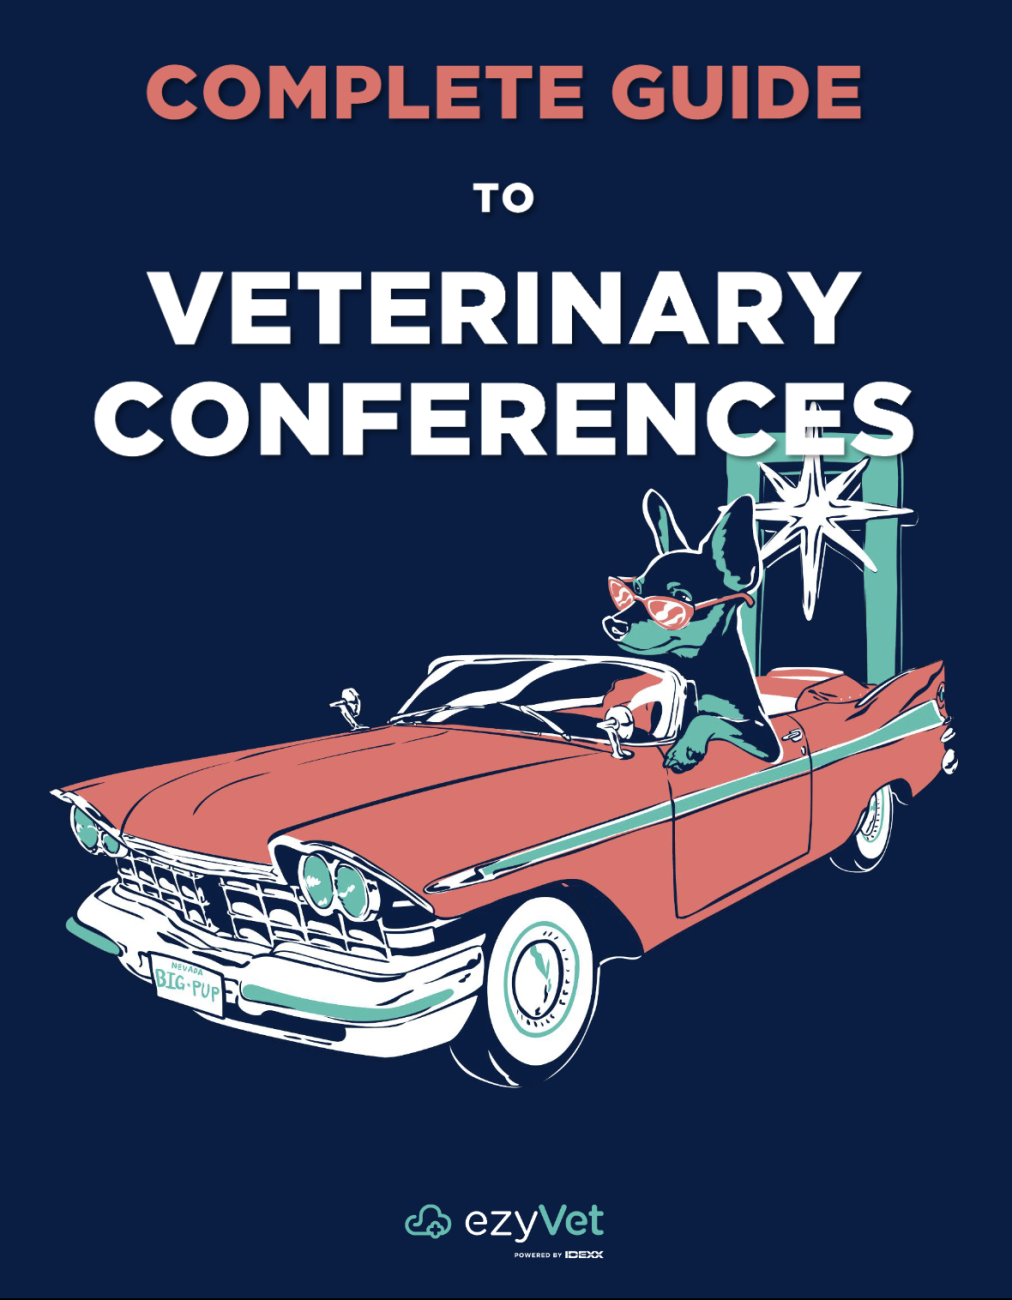 The Complete Guide to Veterinary Conferences IDEXX Software